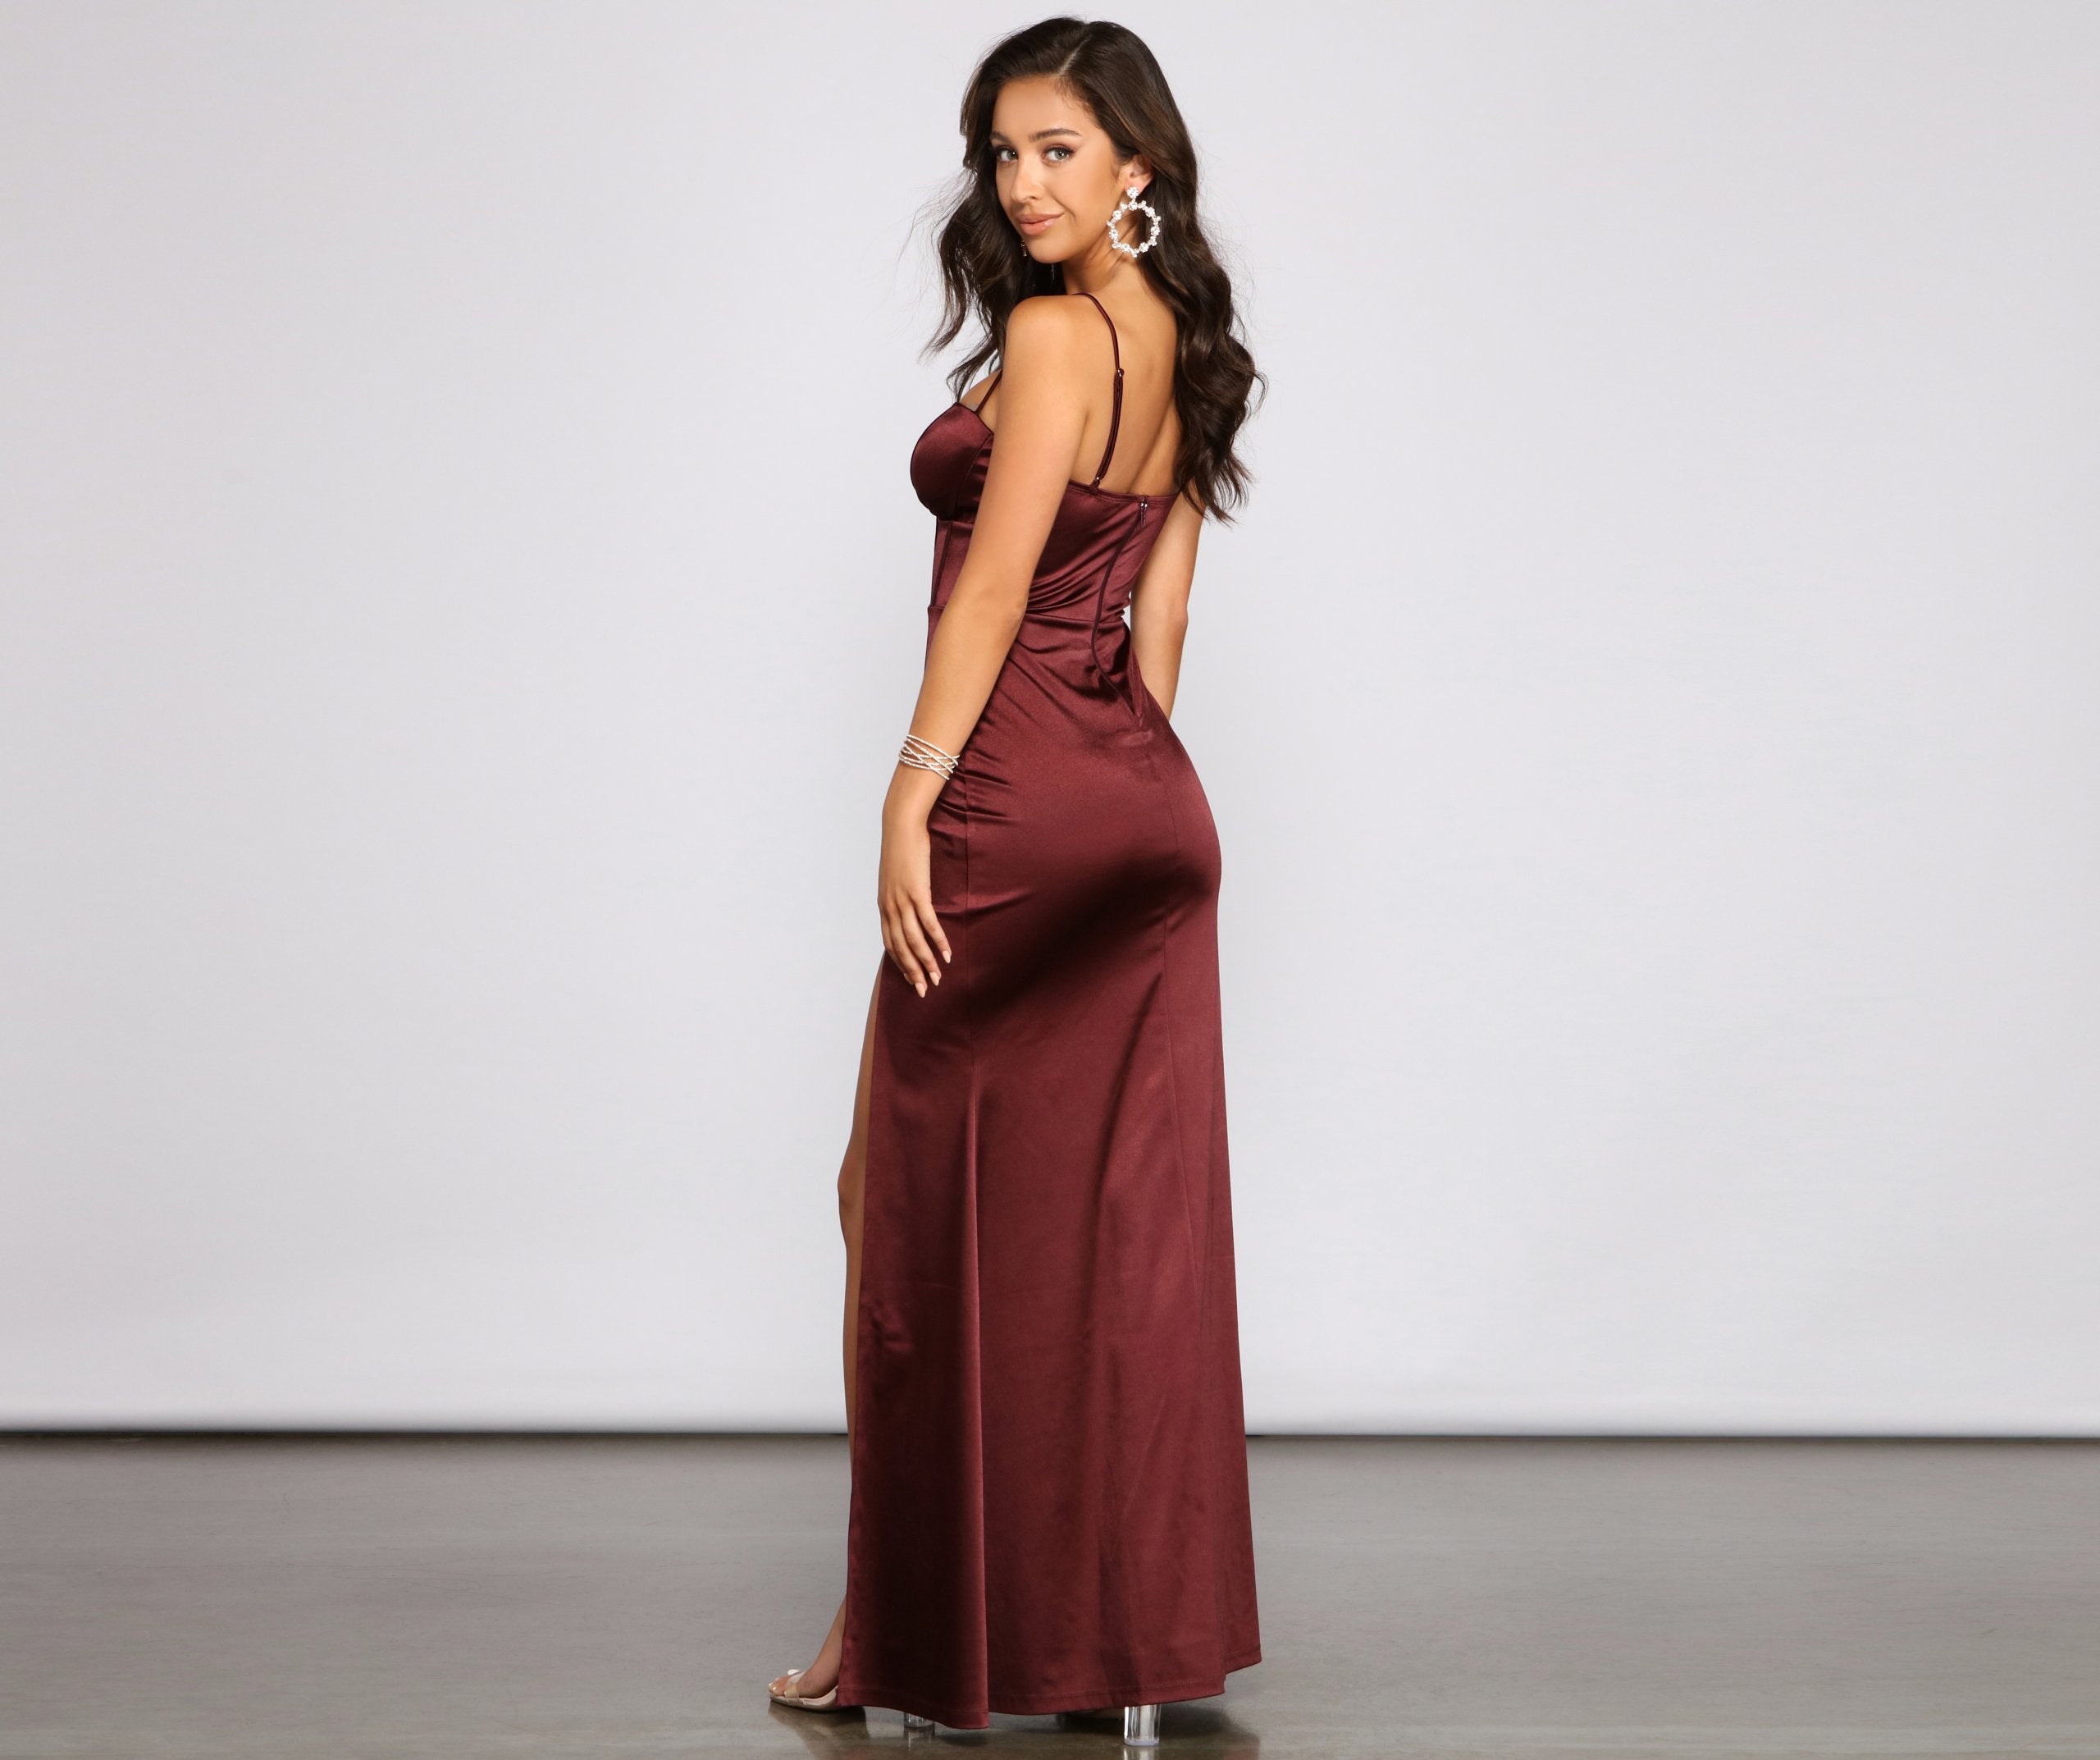 Nora High-Slit Mermaid Dress - Lady Occasions